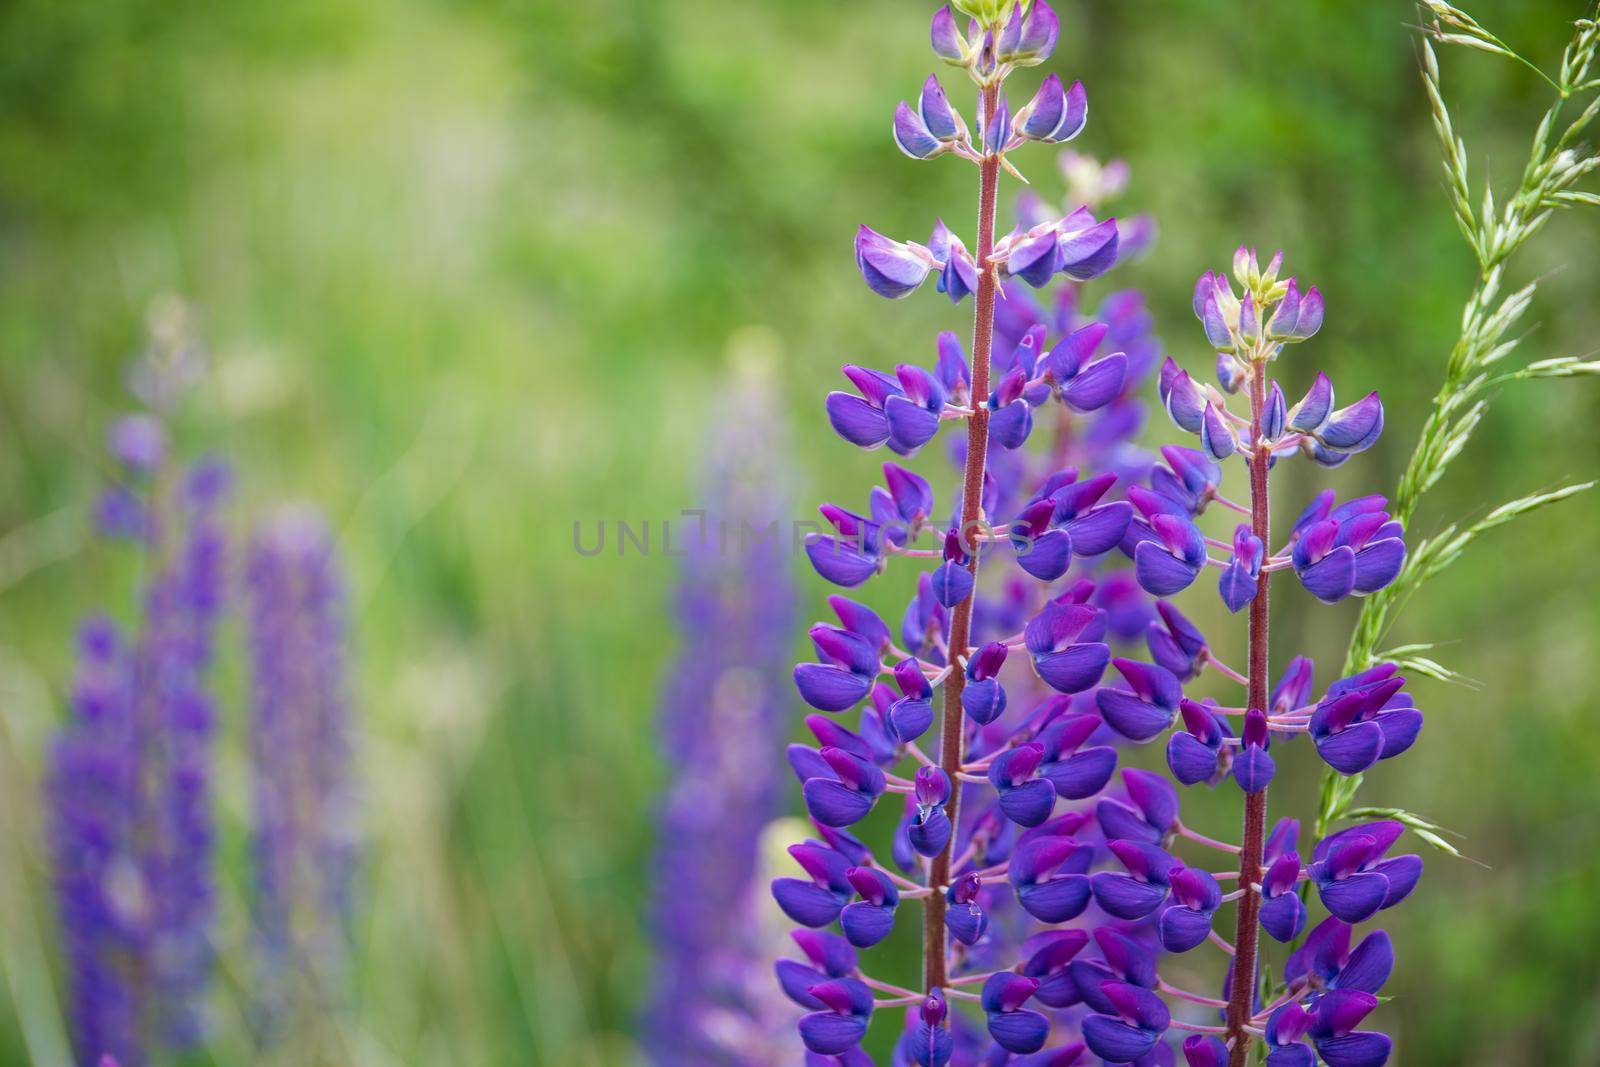 Lupines in bloom by Jindrich_Blecha